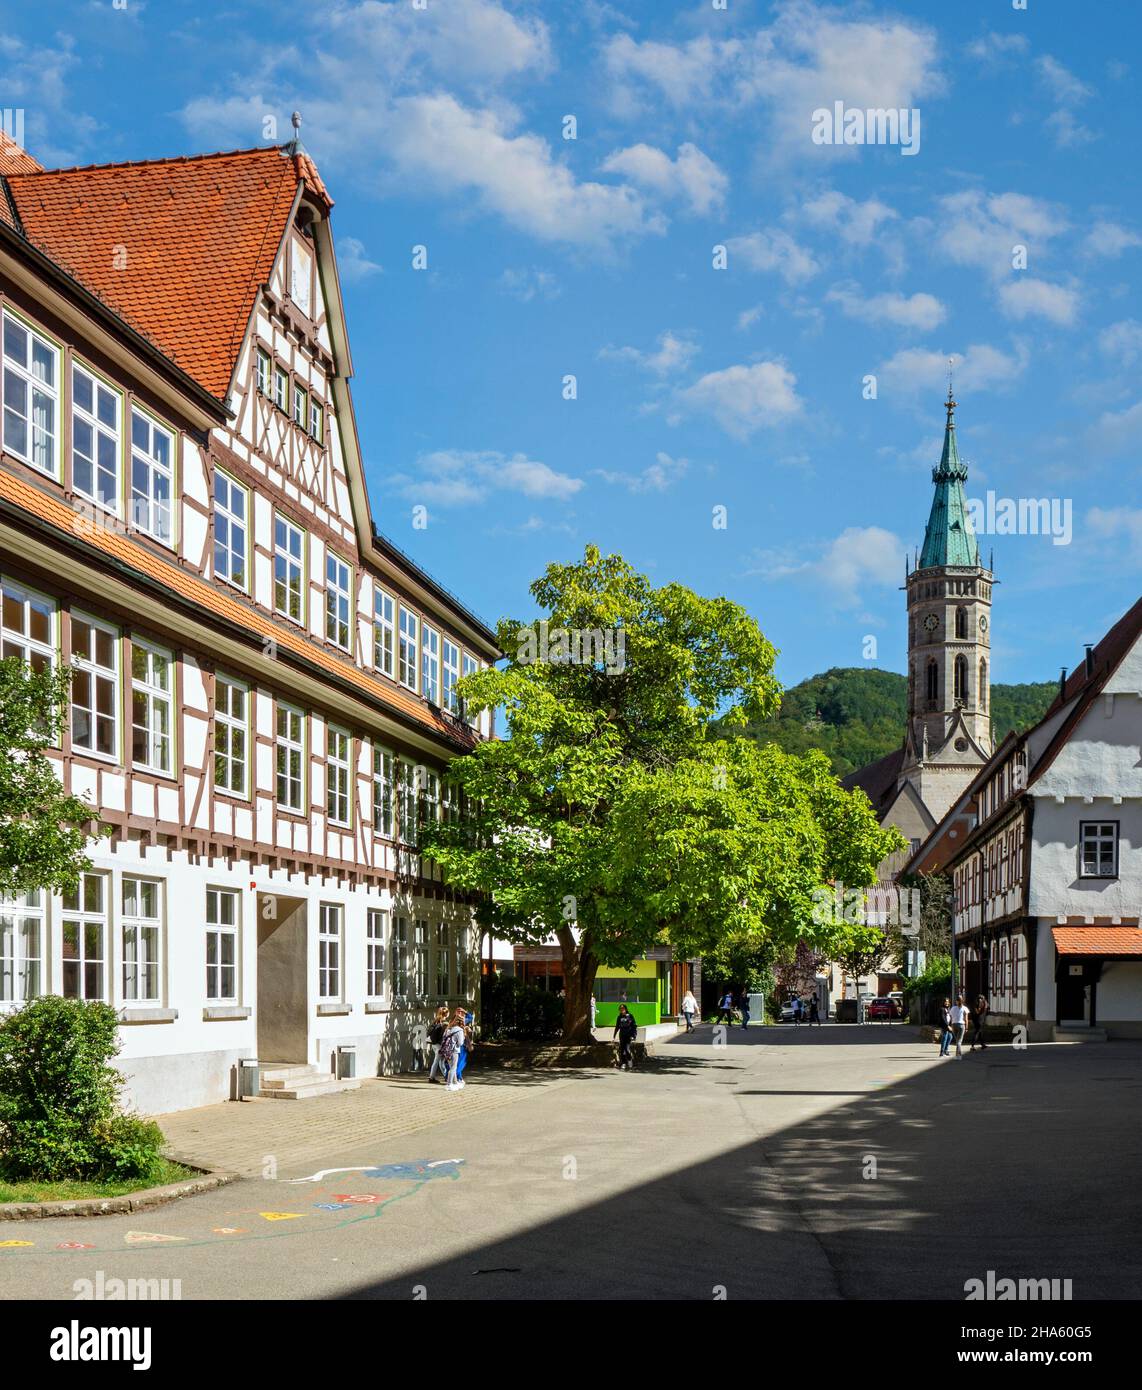 the hospital was founded in 1480 by count eberhard v. im bart. it existed in parts until 1948. today,the barbara gonzaga community school is located in the hospital district,bad urach,baden-württemberg,germany Stock Photo